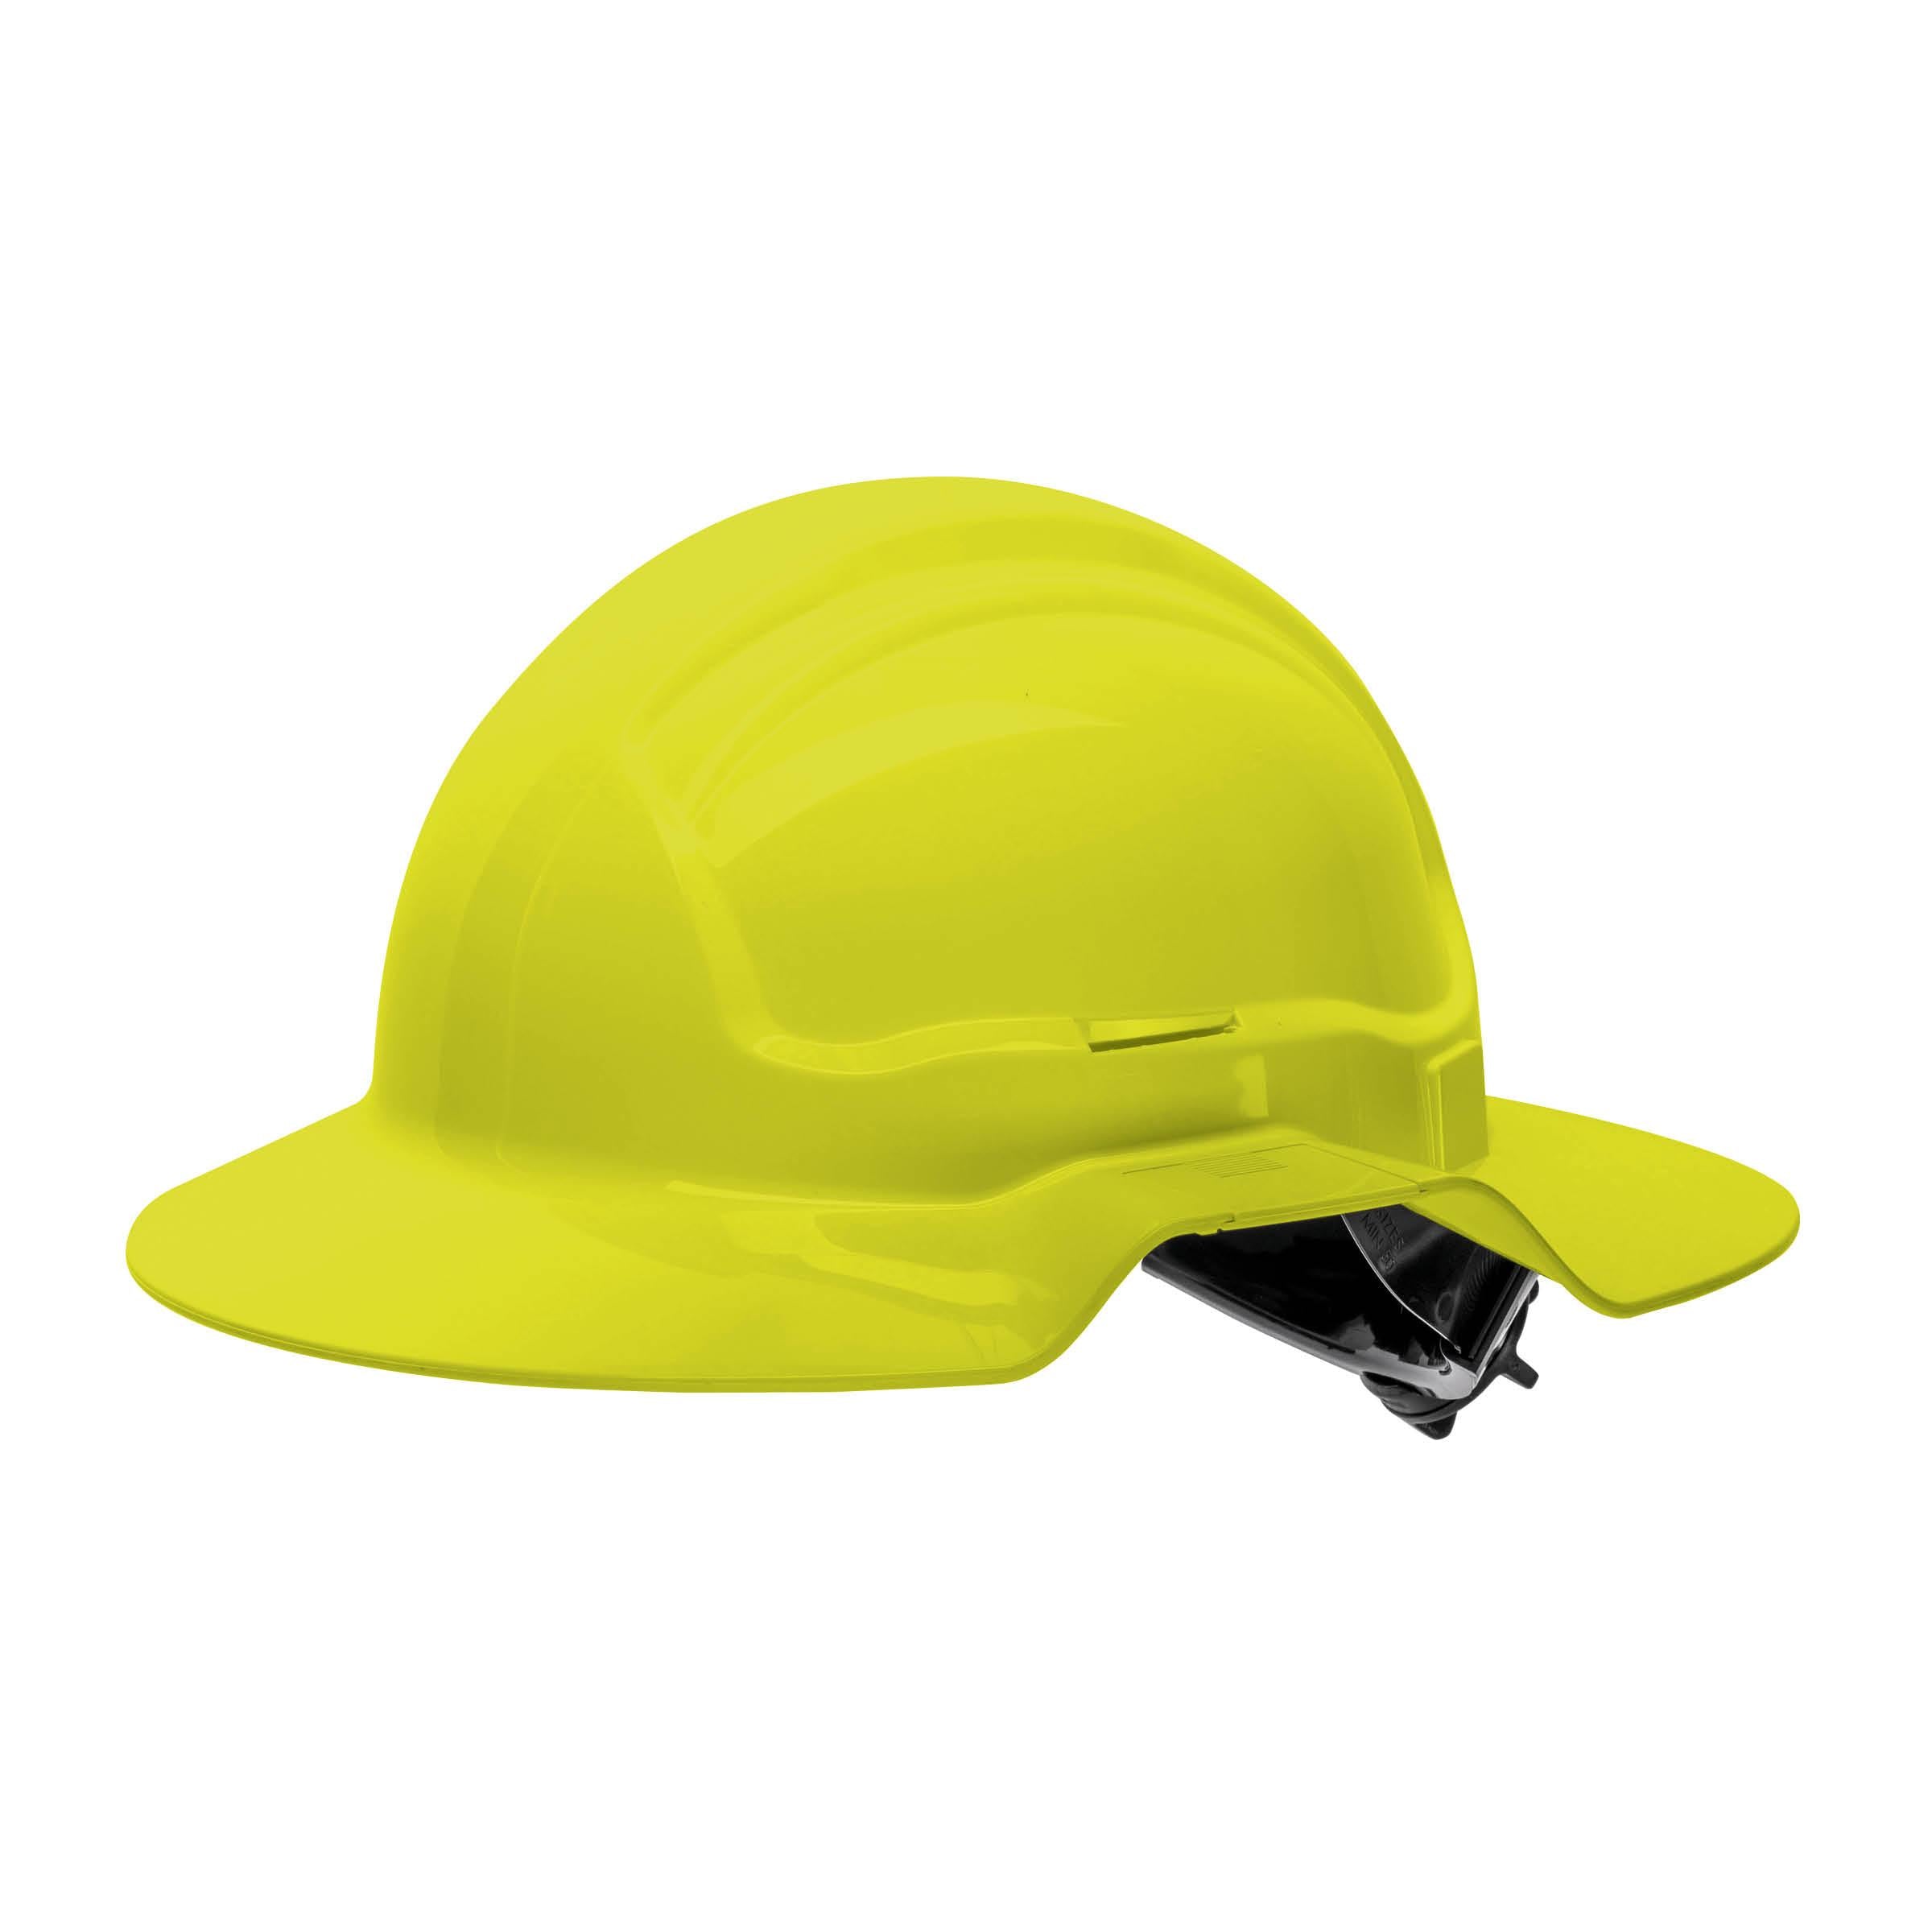 Force360 HPFPRBB56R Broad Brim Hard Hat, Non-Vented, 6 Point Ratchet Harness, Type 1